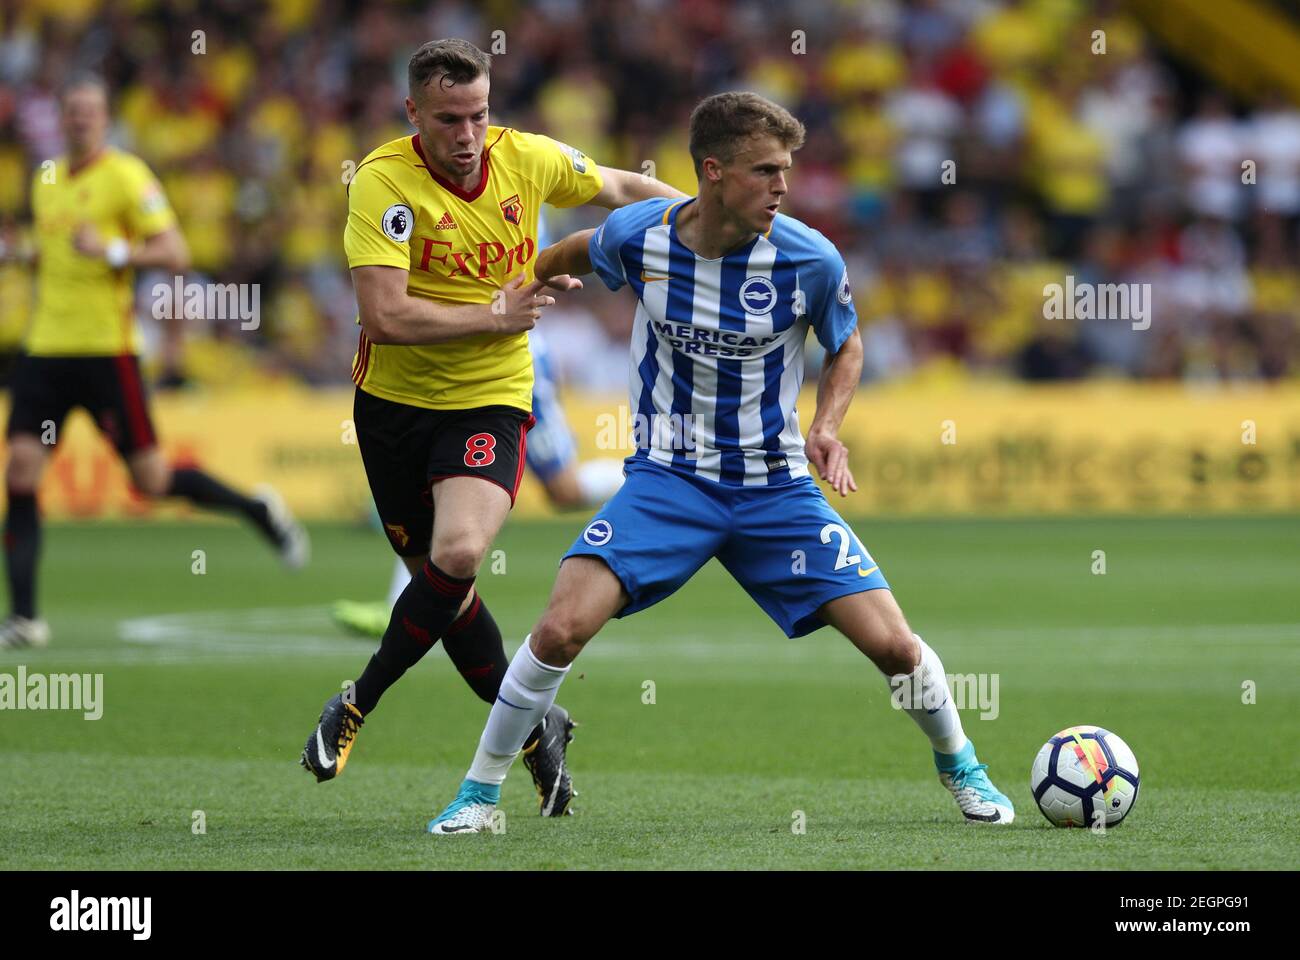 Soccer Football - Premier League - Watford vs Brighton & Hove Albion - Watford, Britain - August 26, 2017   Watford's Tom Cleverley in action with Brighton’s Solly March   REUTERS/Eddie Keogh    EDITORIAL USE ONLY. No use with unauthorized audio, video, data, fixture lists, club/league logos or 'live' services. Online in-match use limited to 45 images, no video emulation. No use in betting, games or single club/league/player publications. Please contact your account representative for further details. Stock Photo